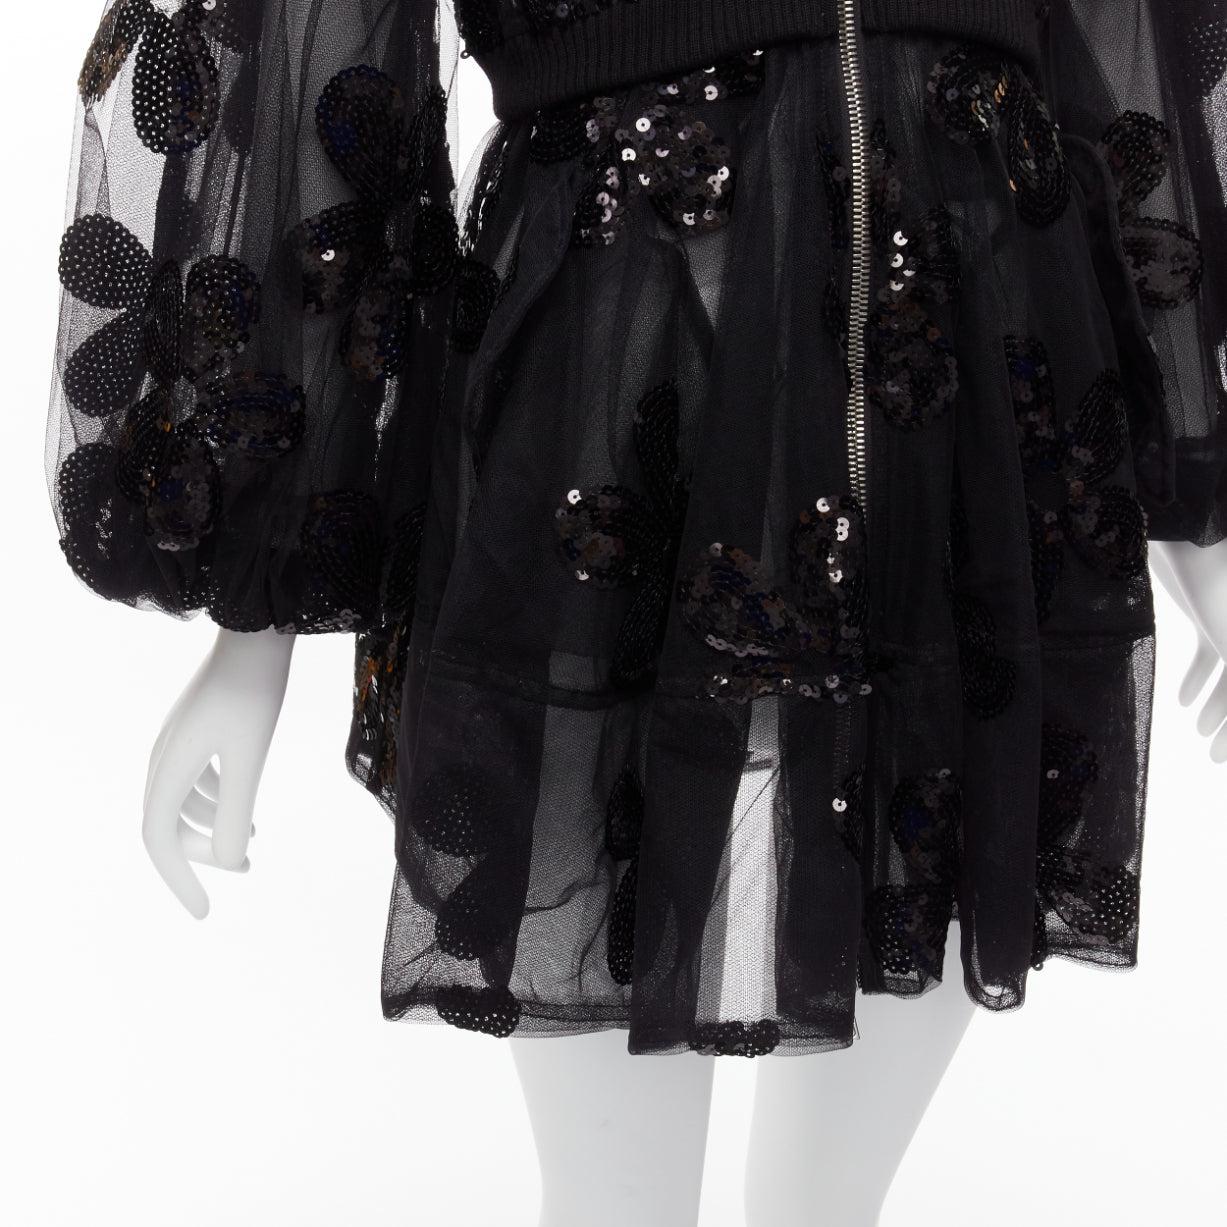 SIMONE ROCHA 2023 black sequin embellished tiered tulle fitted bomber coat UK6 XS
Reference: AAWC/A00525
Brand: Simone Rocha
Collection: 2023
Material: Polyester
Color: Black
Pattern: Sequins
Closure: Zip
Extra Details: The ethereal style of